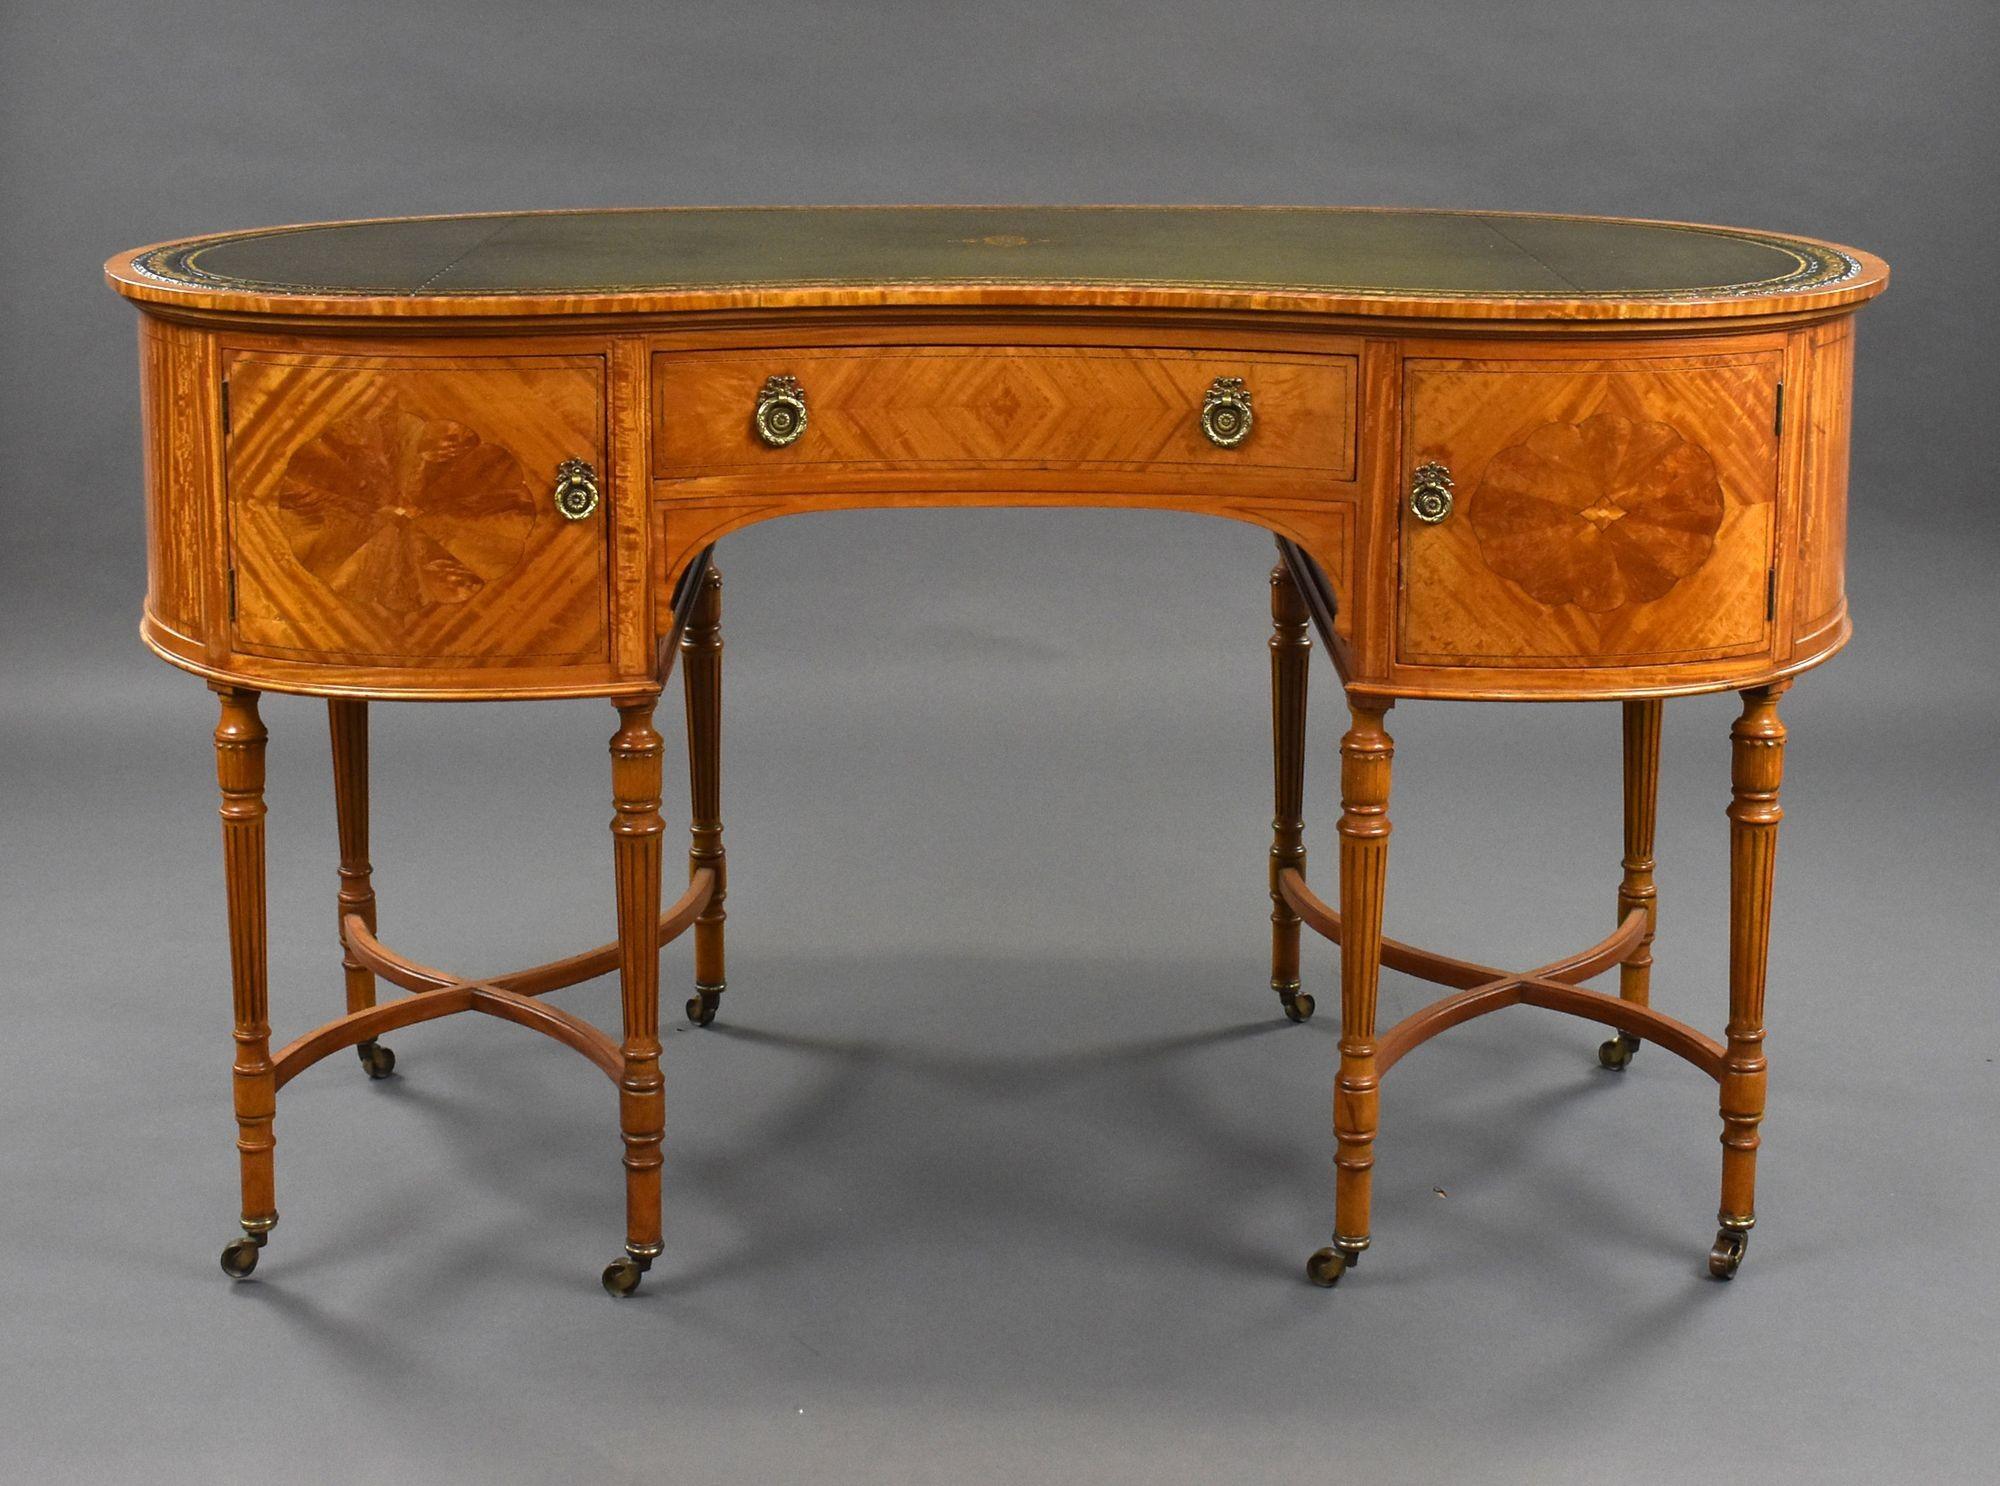 For sale is a good quality Edwardian satinwood kidney shaped desk, having a quality green leather writing surface, decorated with gold tooling and a centre motif, above a single drawer to the centre flanked by a cupboard on either side. Standing on